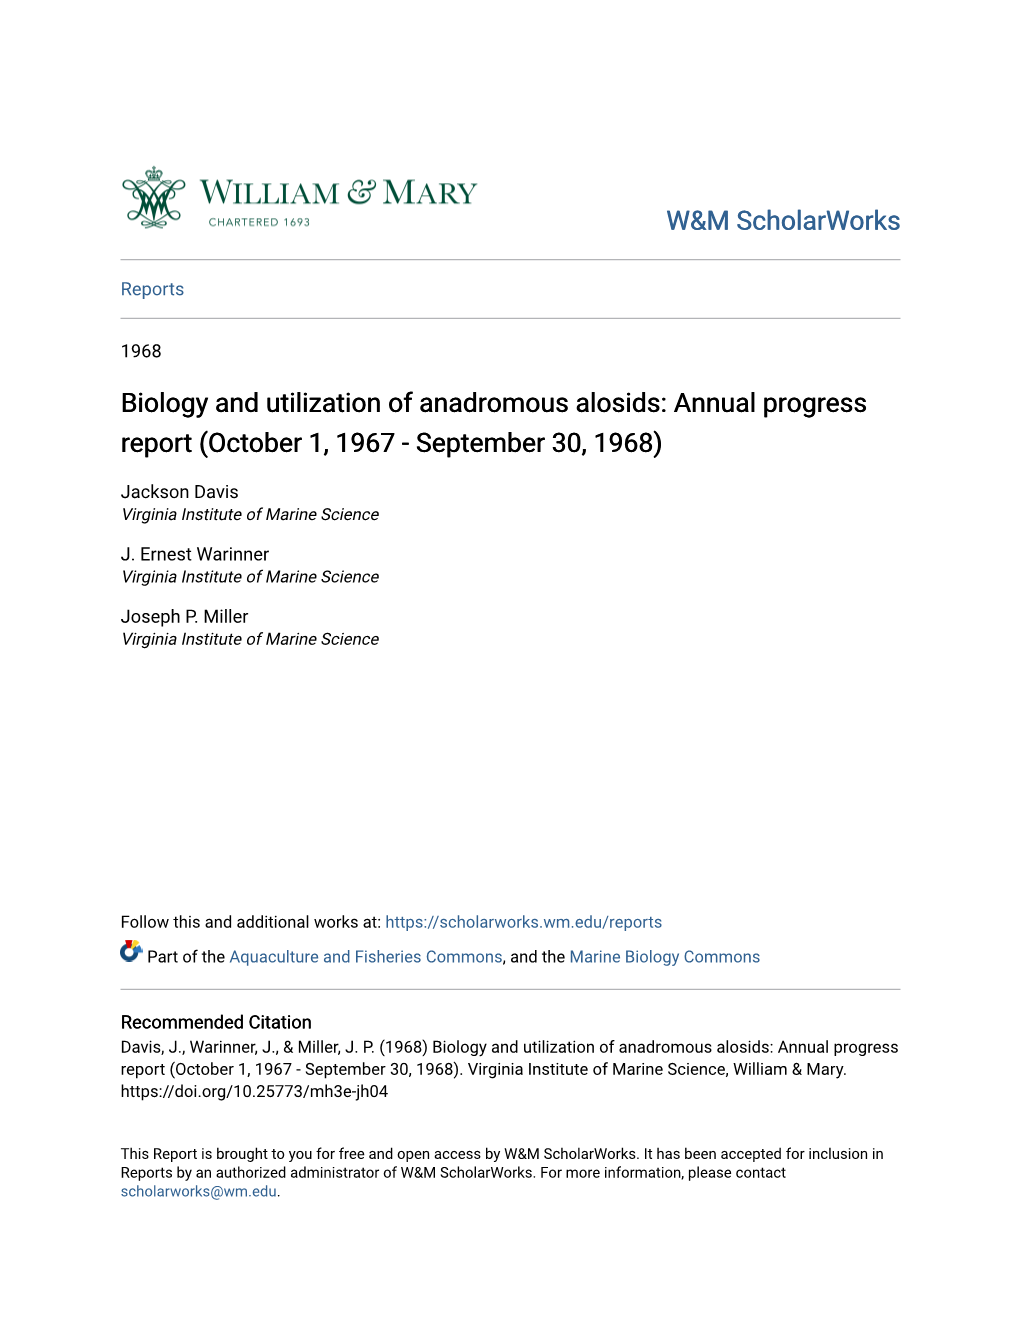 Biology and Utilization of Anadromous Alosids: Annual Progress Report (October 1, 1967 - September 30, 1968)